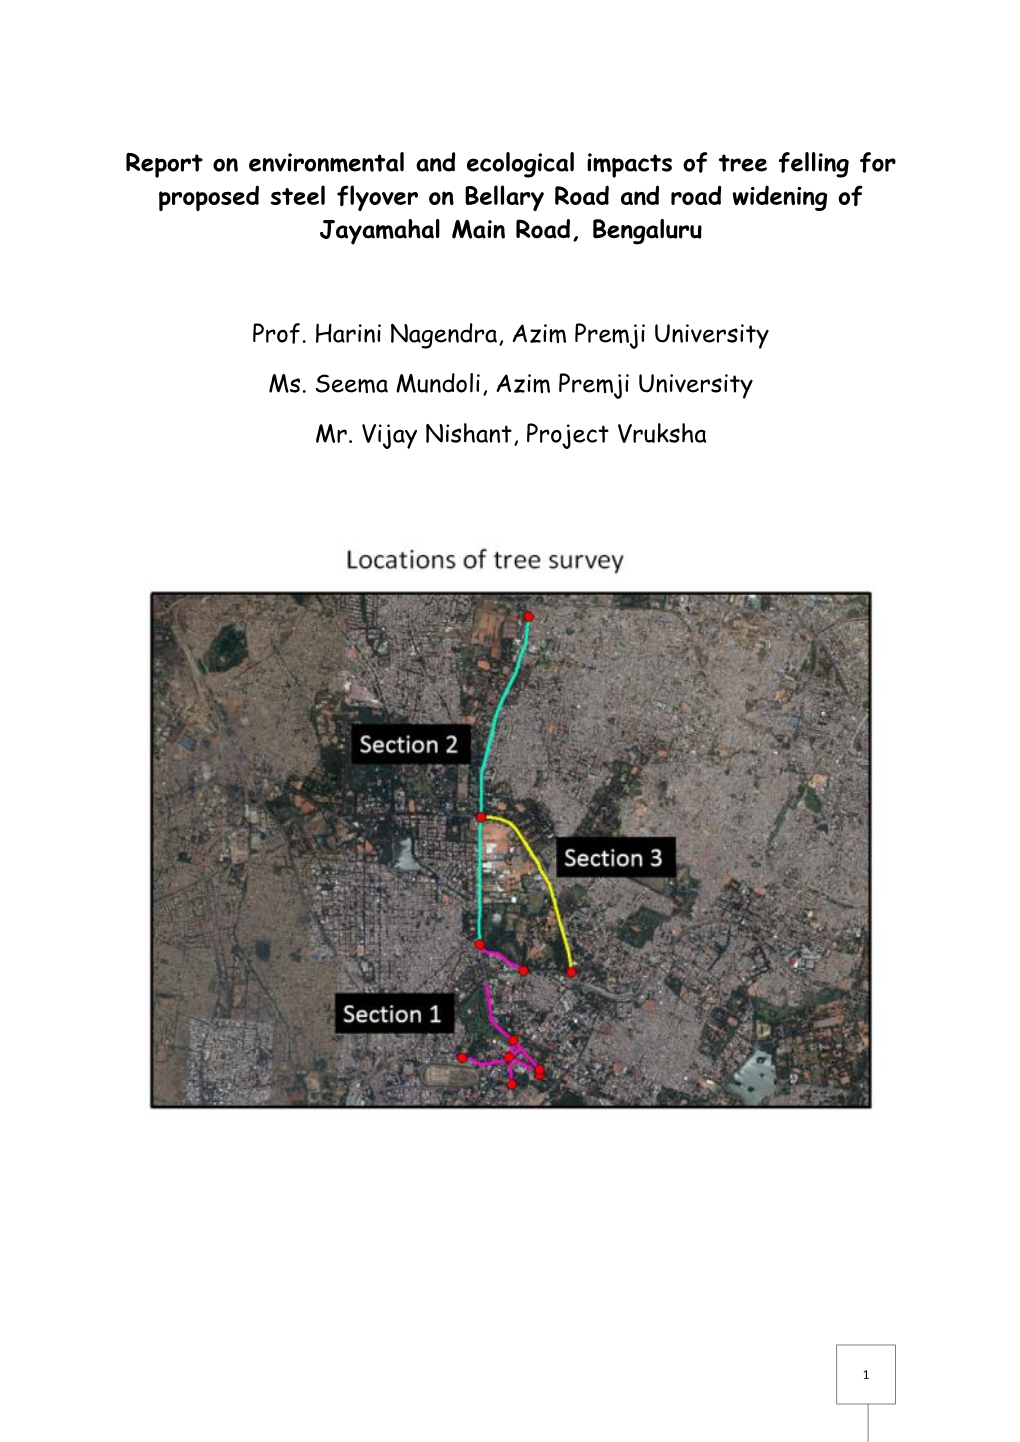 Report on Environmental and Ecological Impacts of Tree Felling for Proposed Steel Flyover on Bellary Road and Road Widening of Jayamahal Main Road, Bengaluru